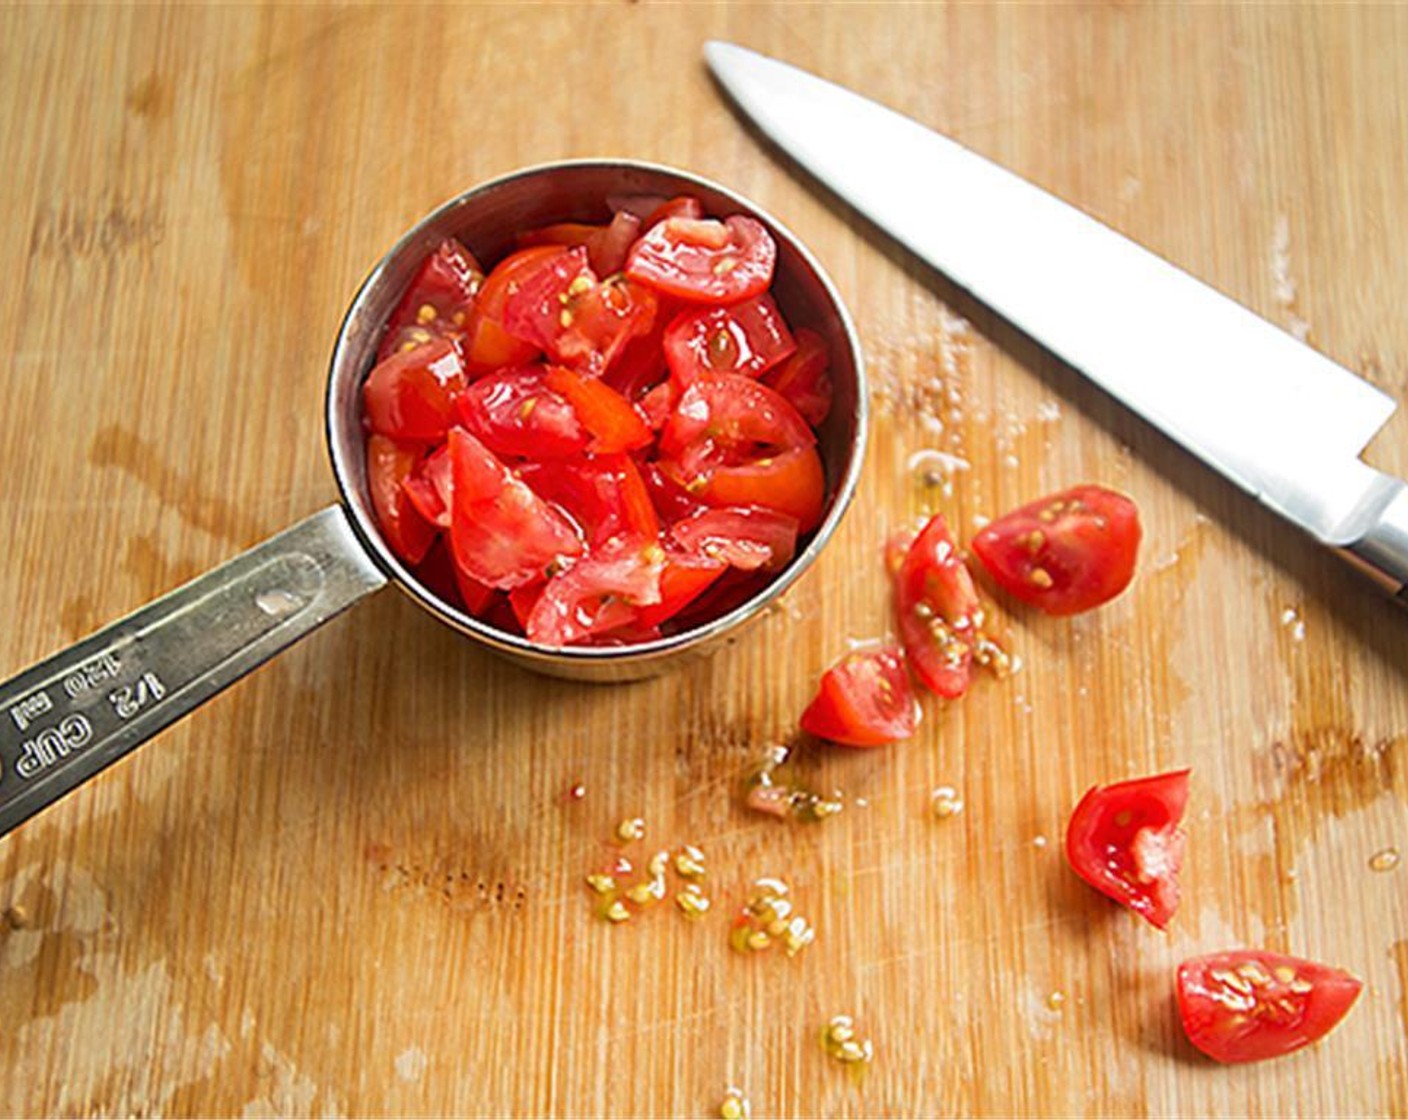 step 4 Prepare the Tomato (1/2 cup) and stir it in. Cook uncovered for 5 minutes or until liquid evaporates.